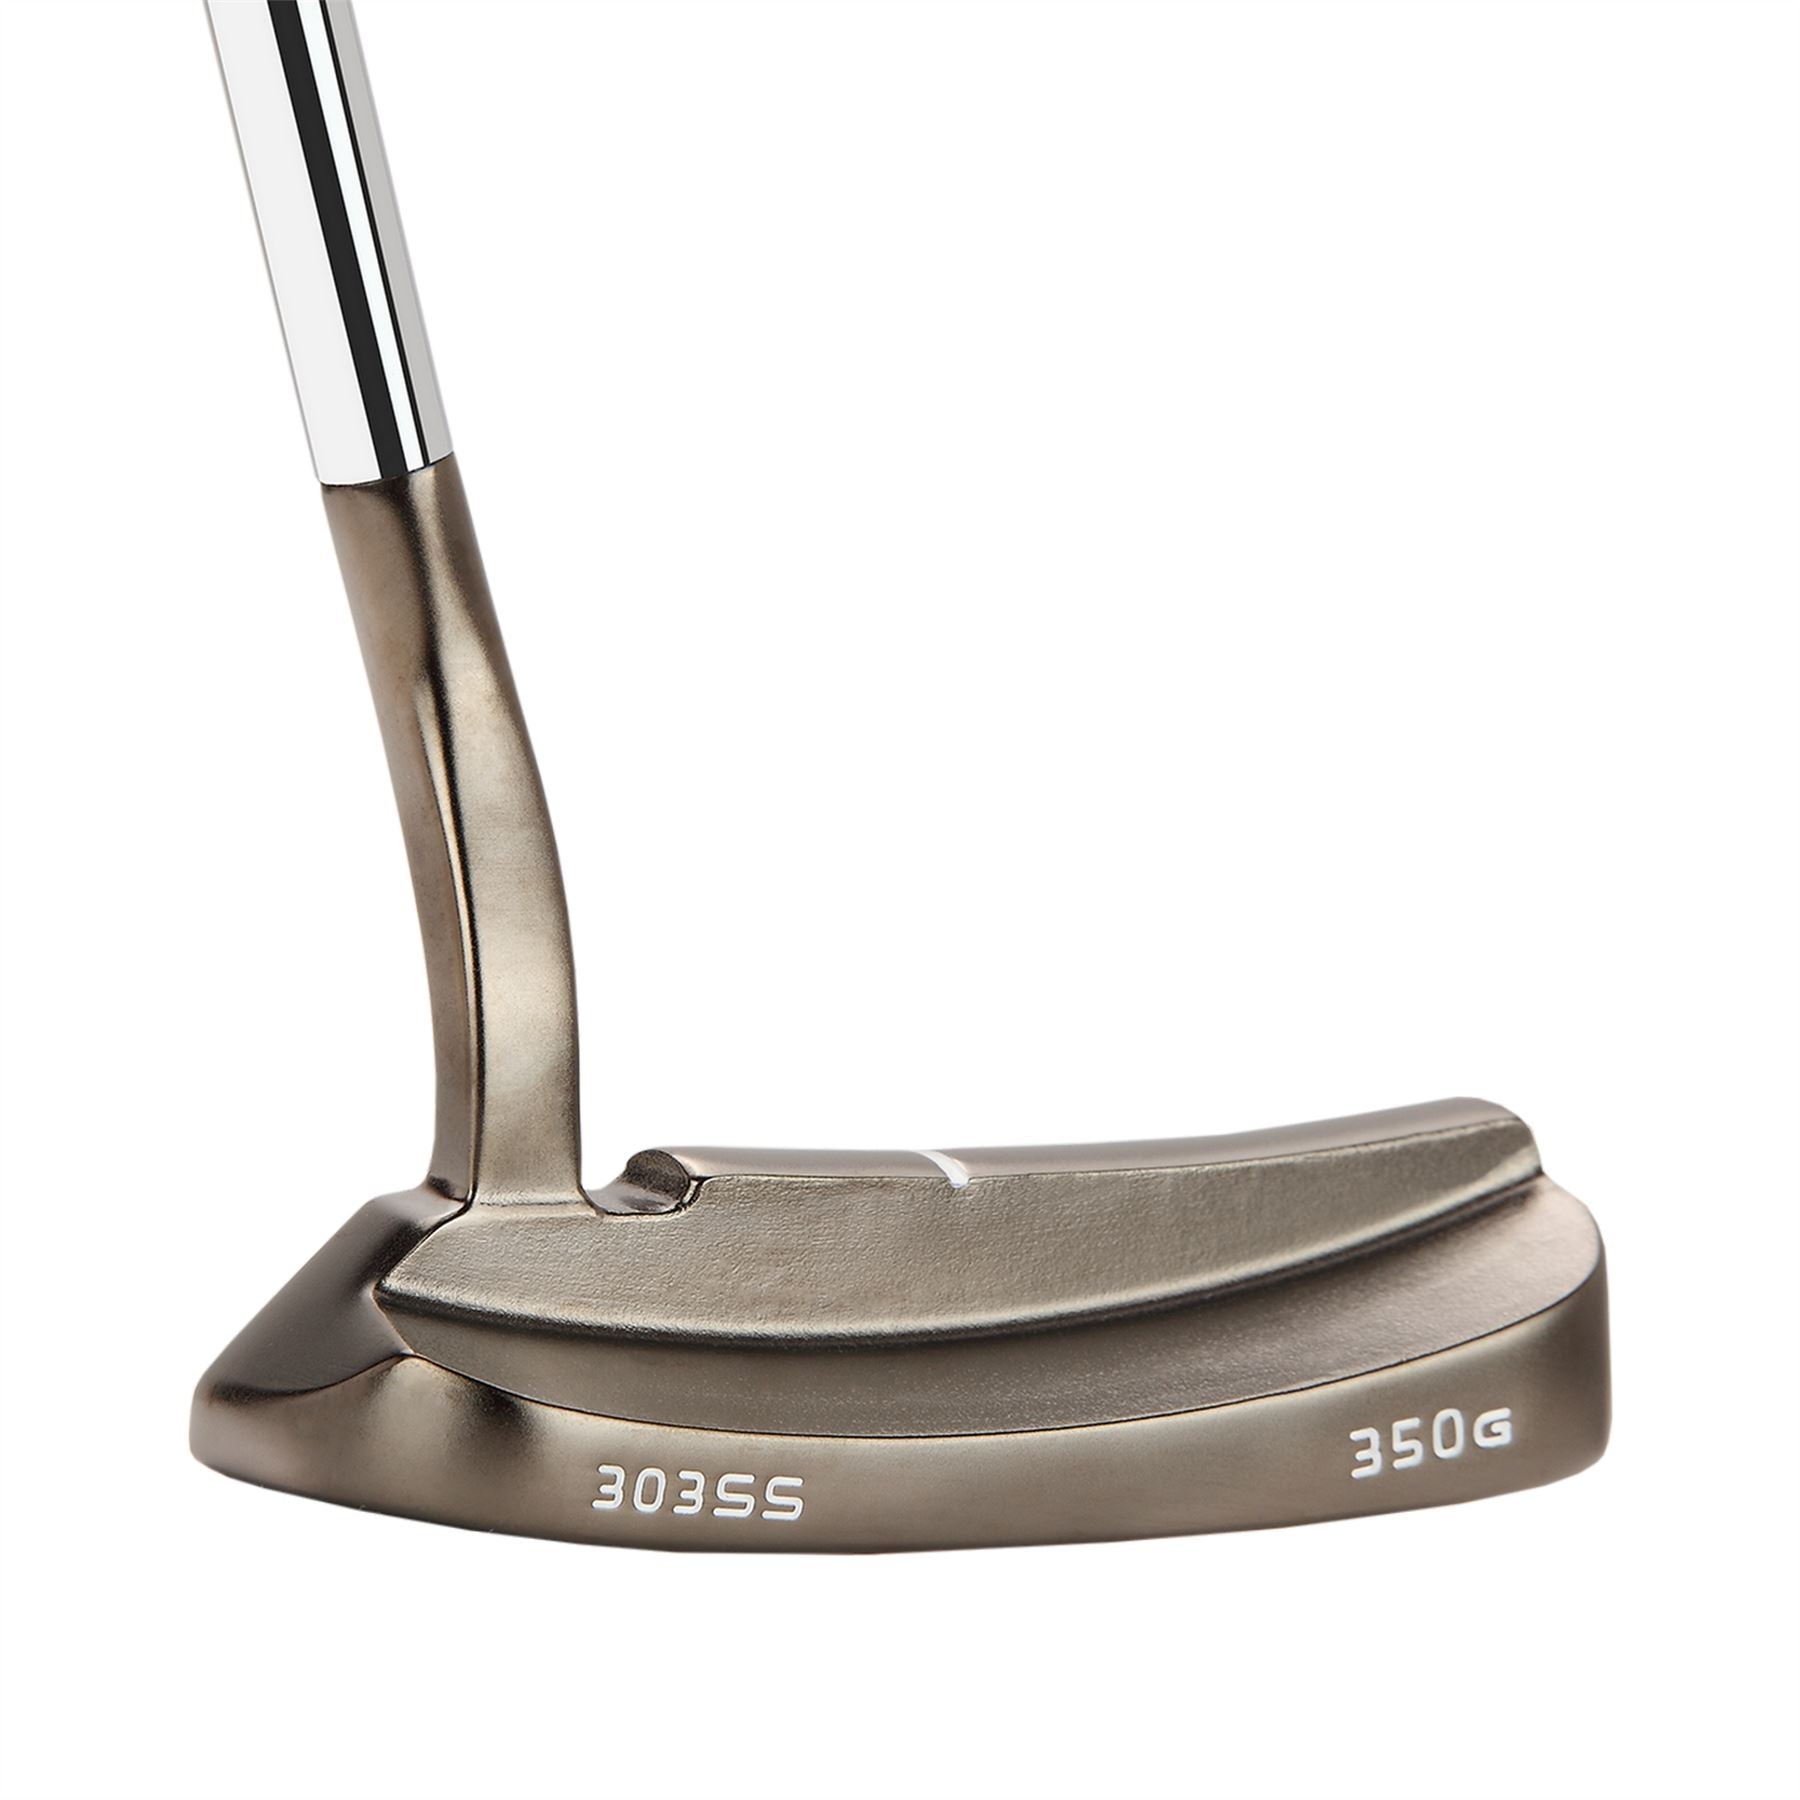 Forgan Golf F-Series Collection 1 Putter